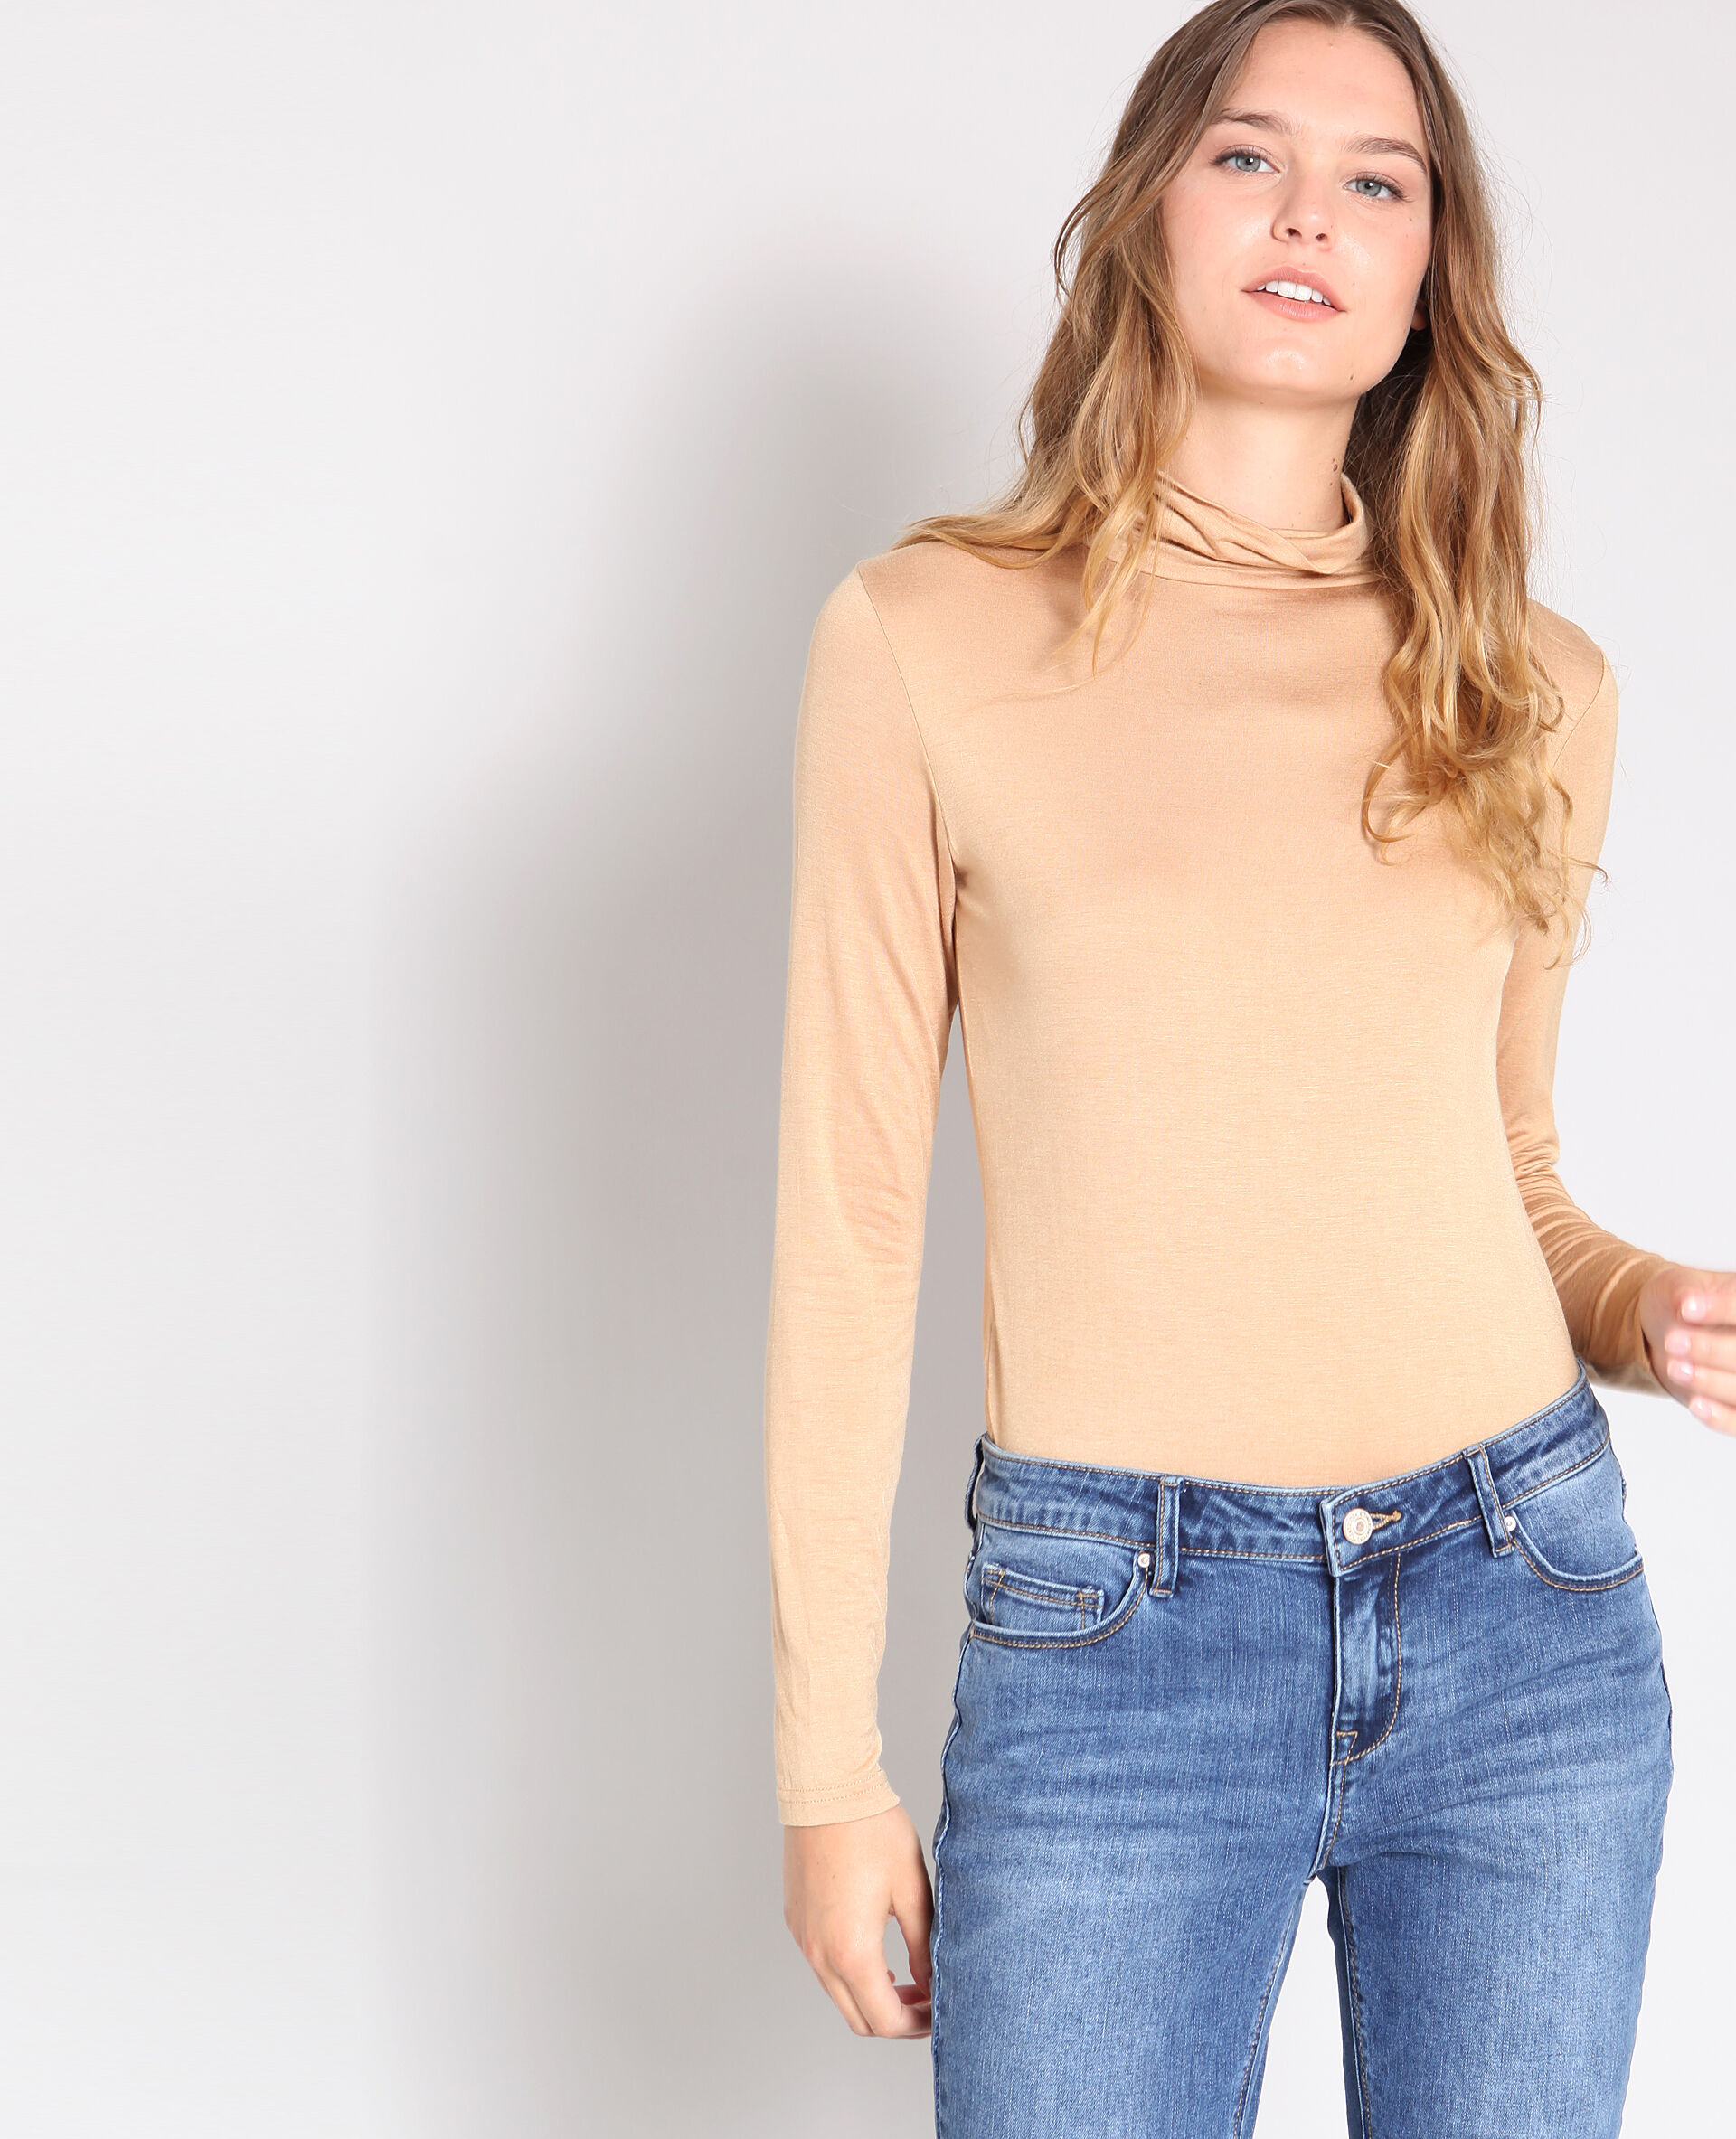 sous pull beige